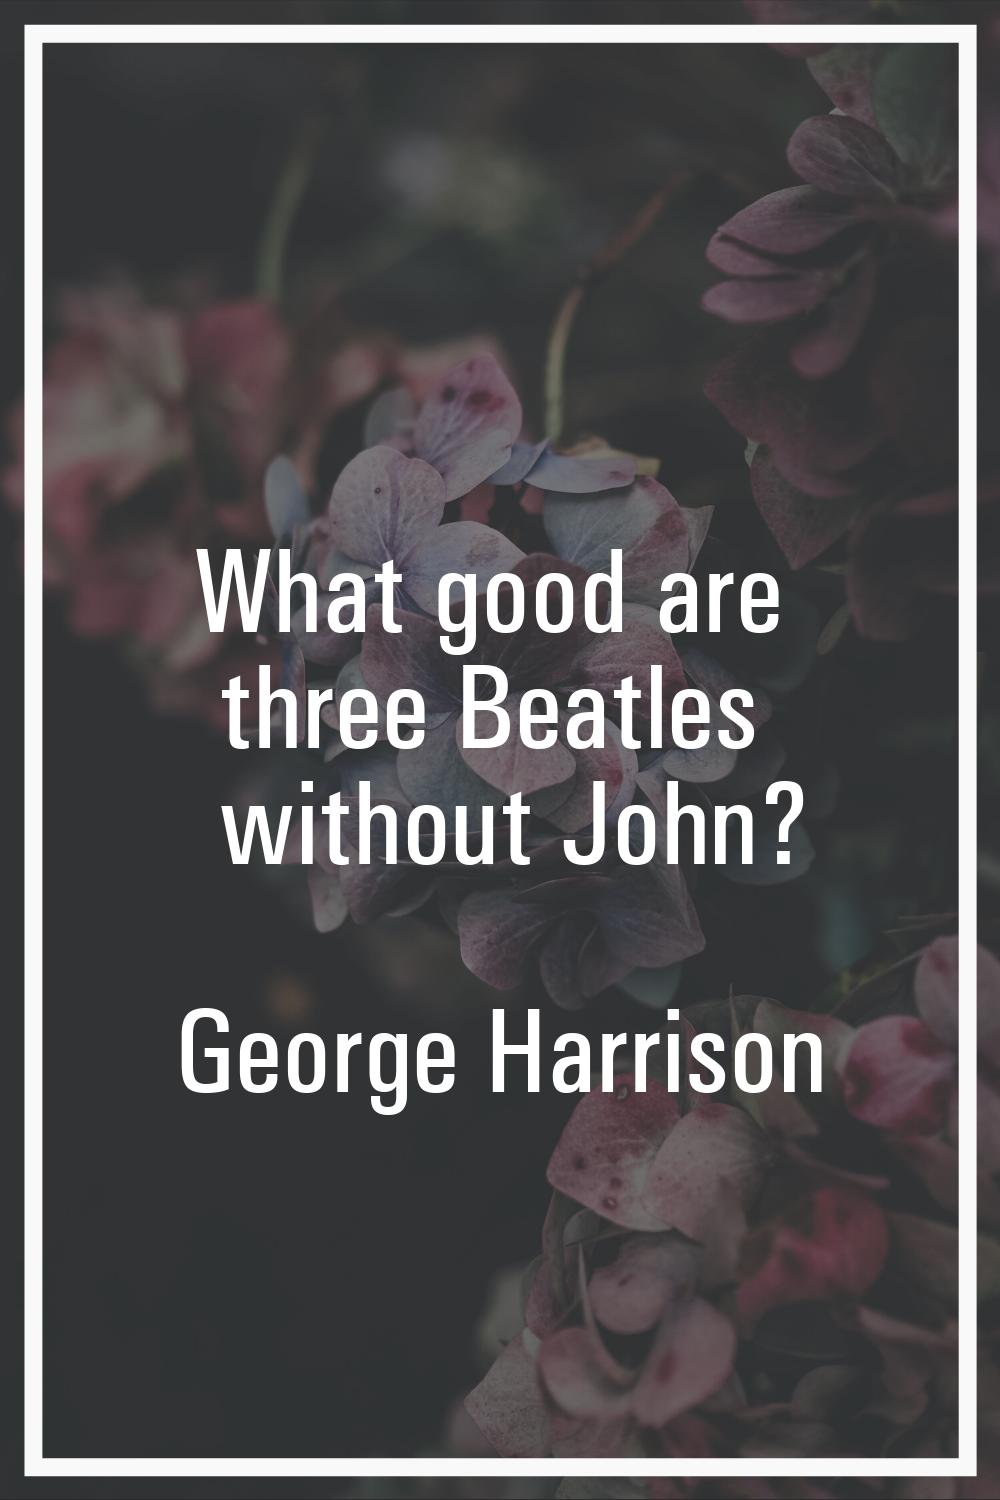 What good are three Beatles without John?